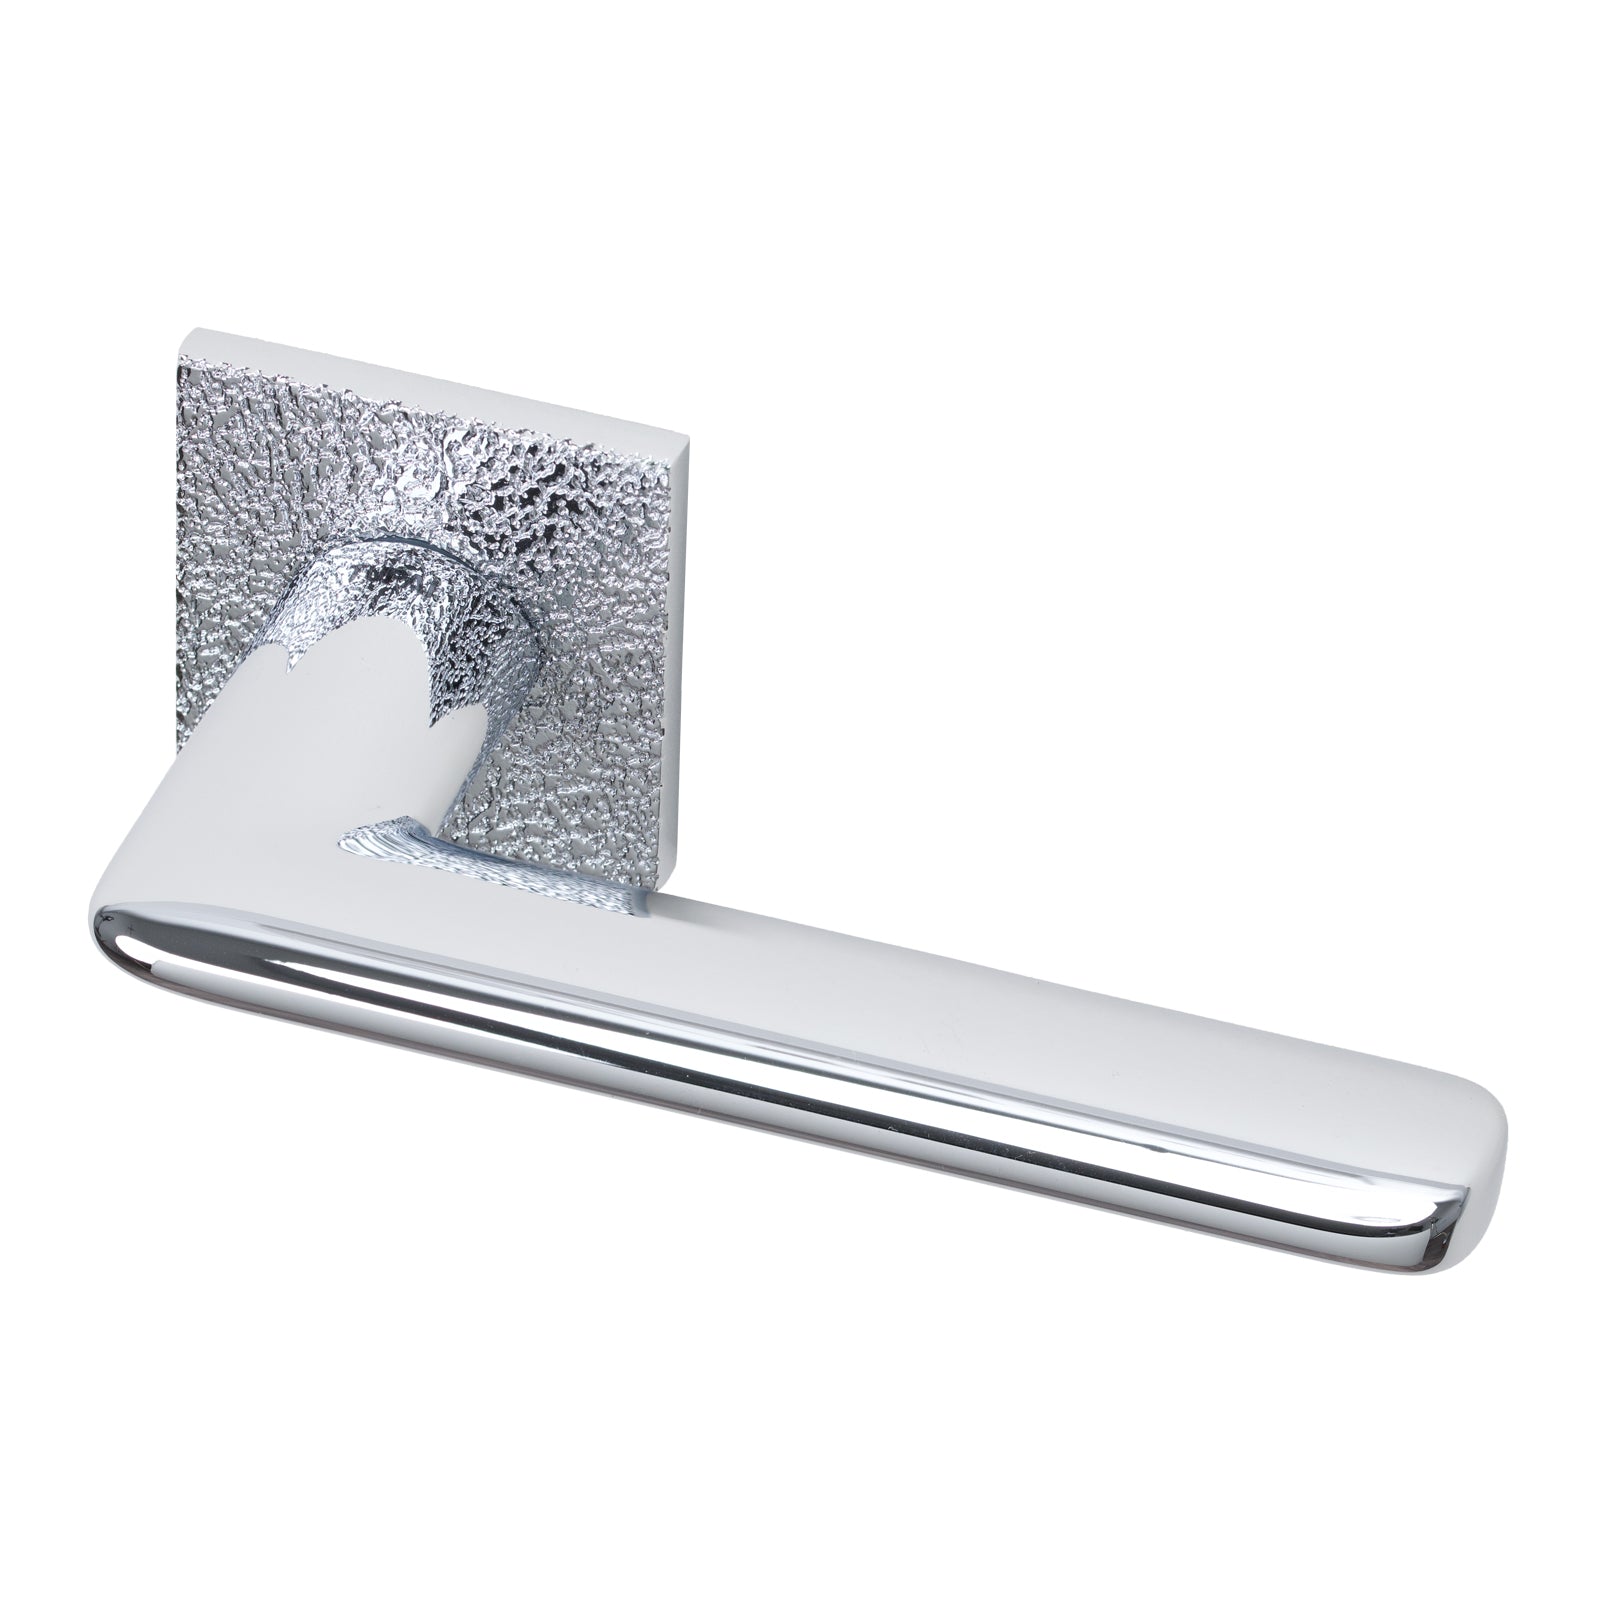 Edral Leather Texture Lever on Rose Door Handle in Bright Chrome Finish SHOW